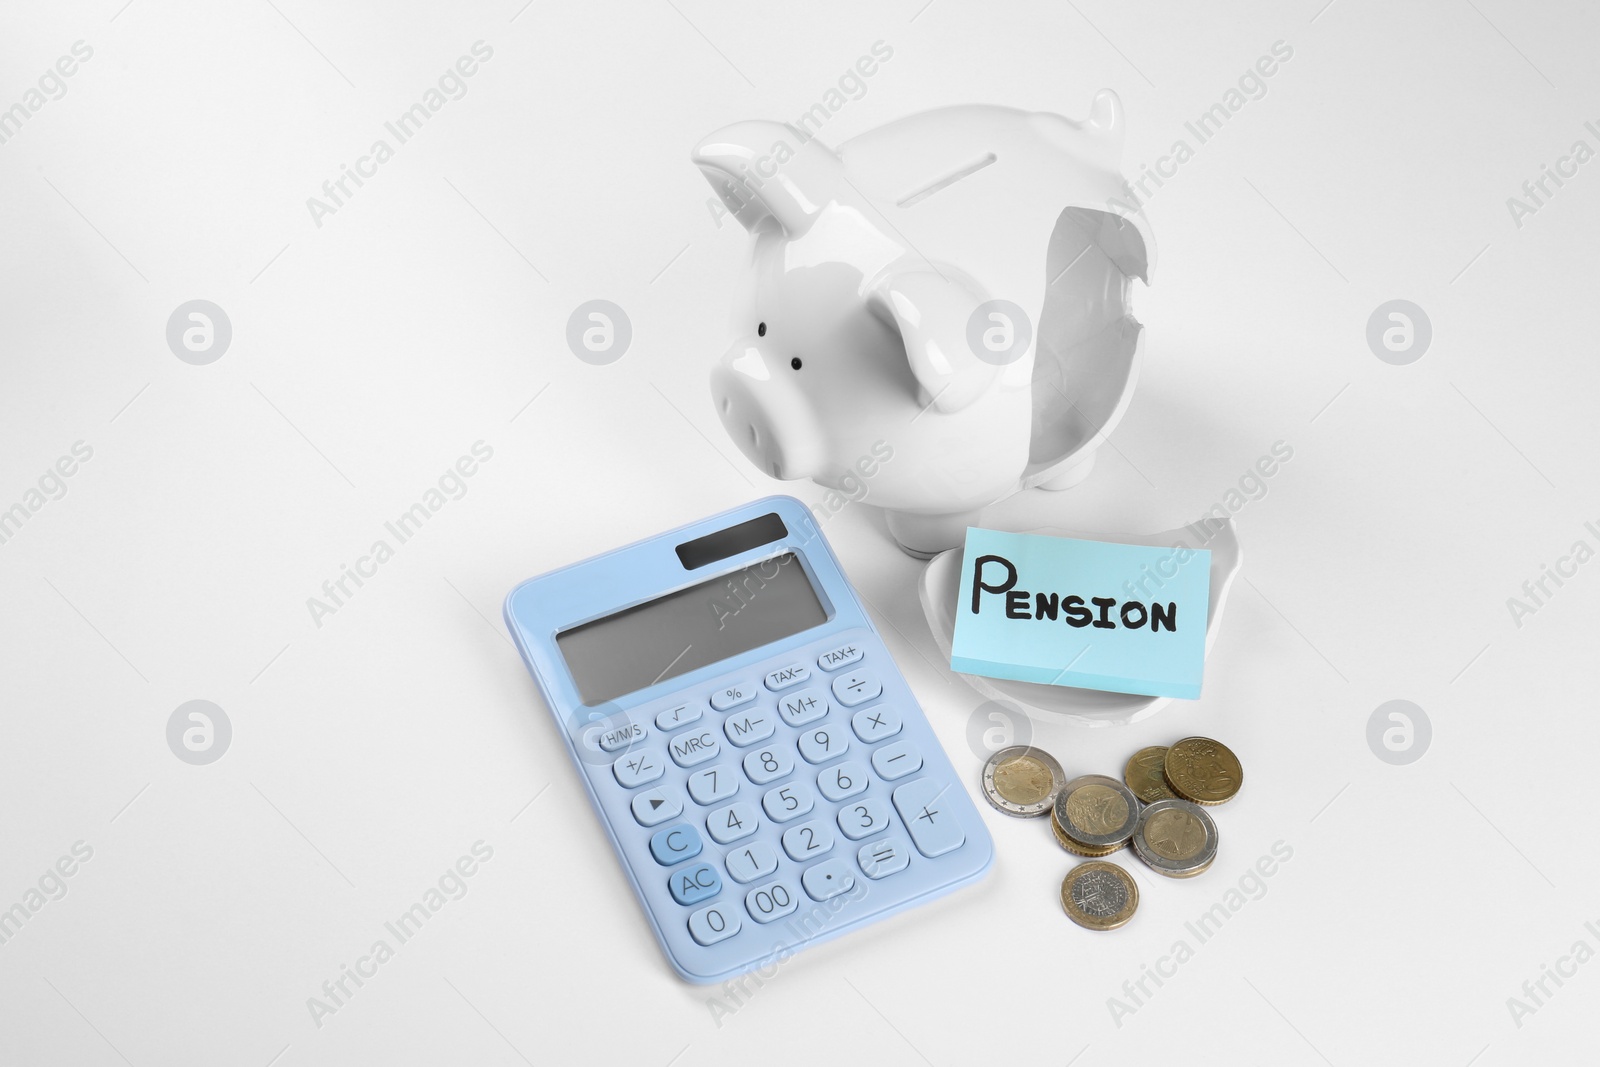 Photo of Calculator, card with word Pension, broken piggy bank and coins on white background. Retirement concept